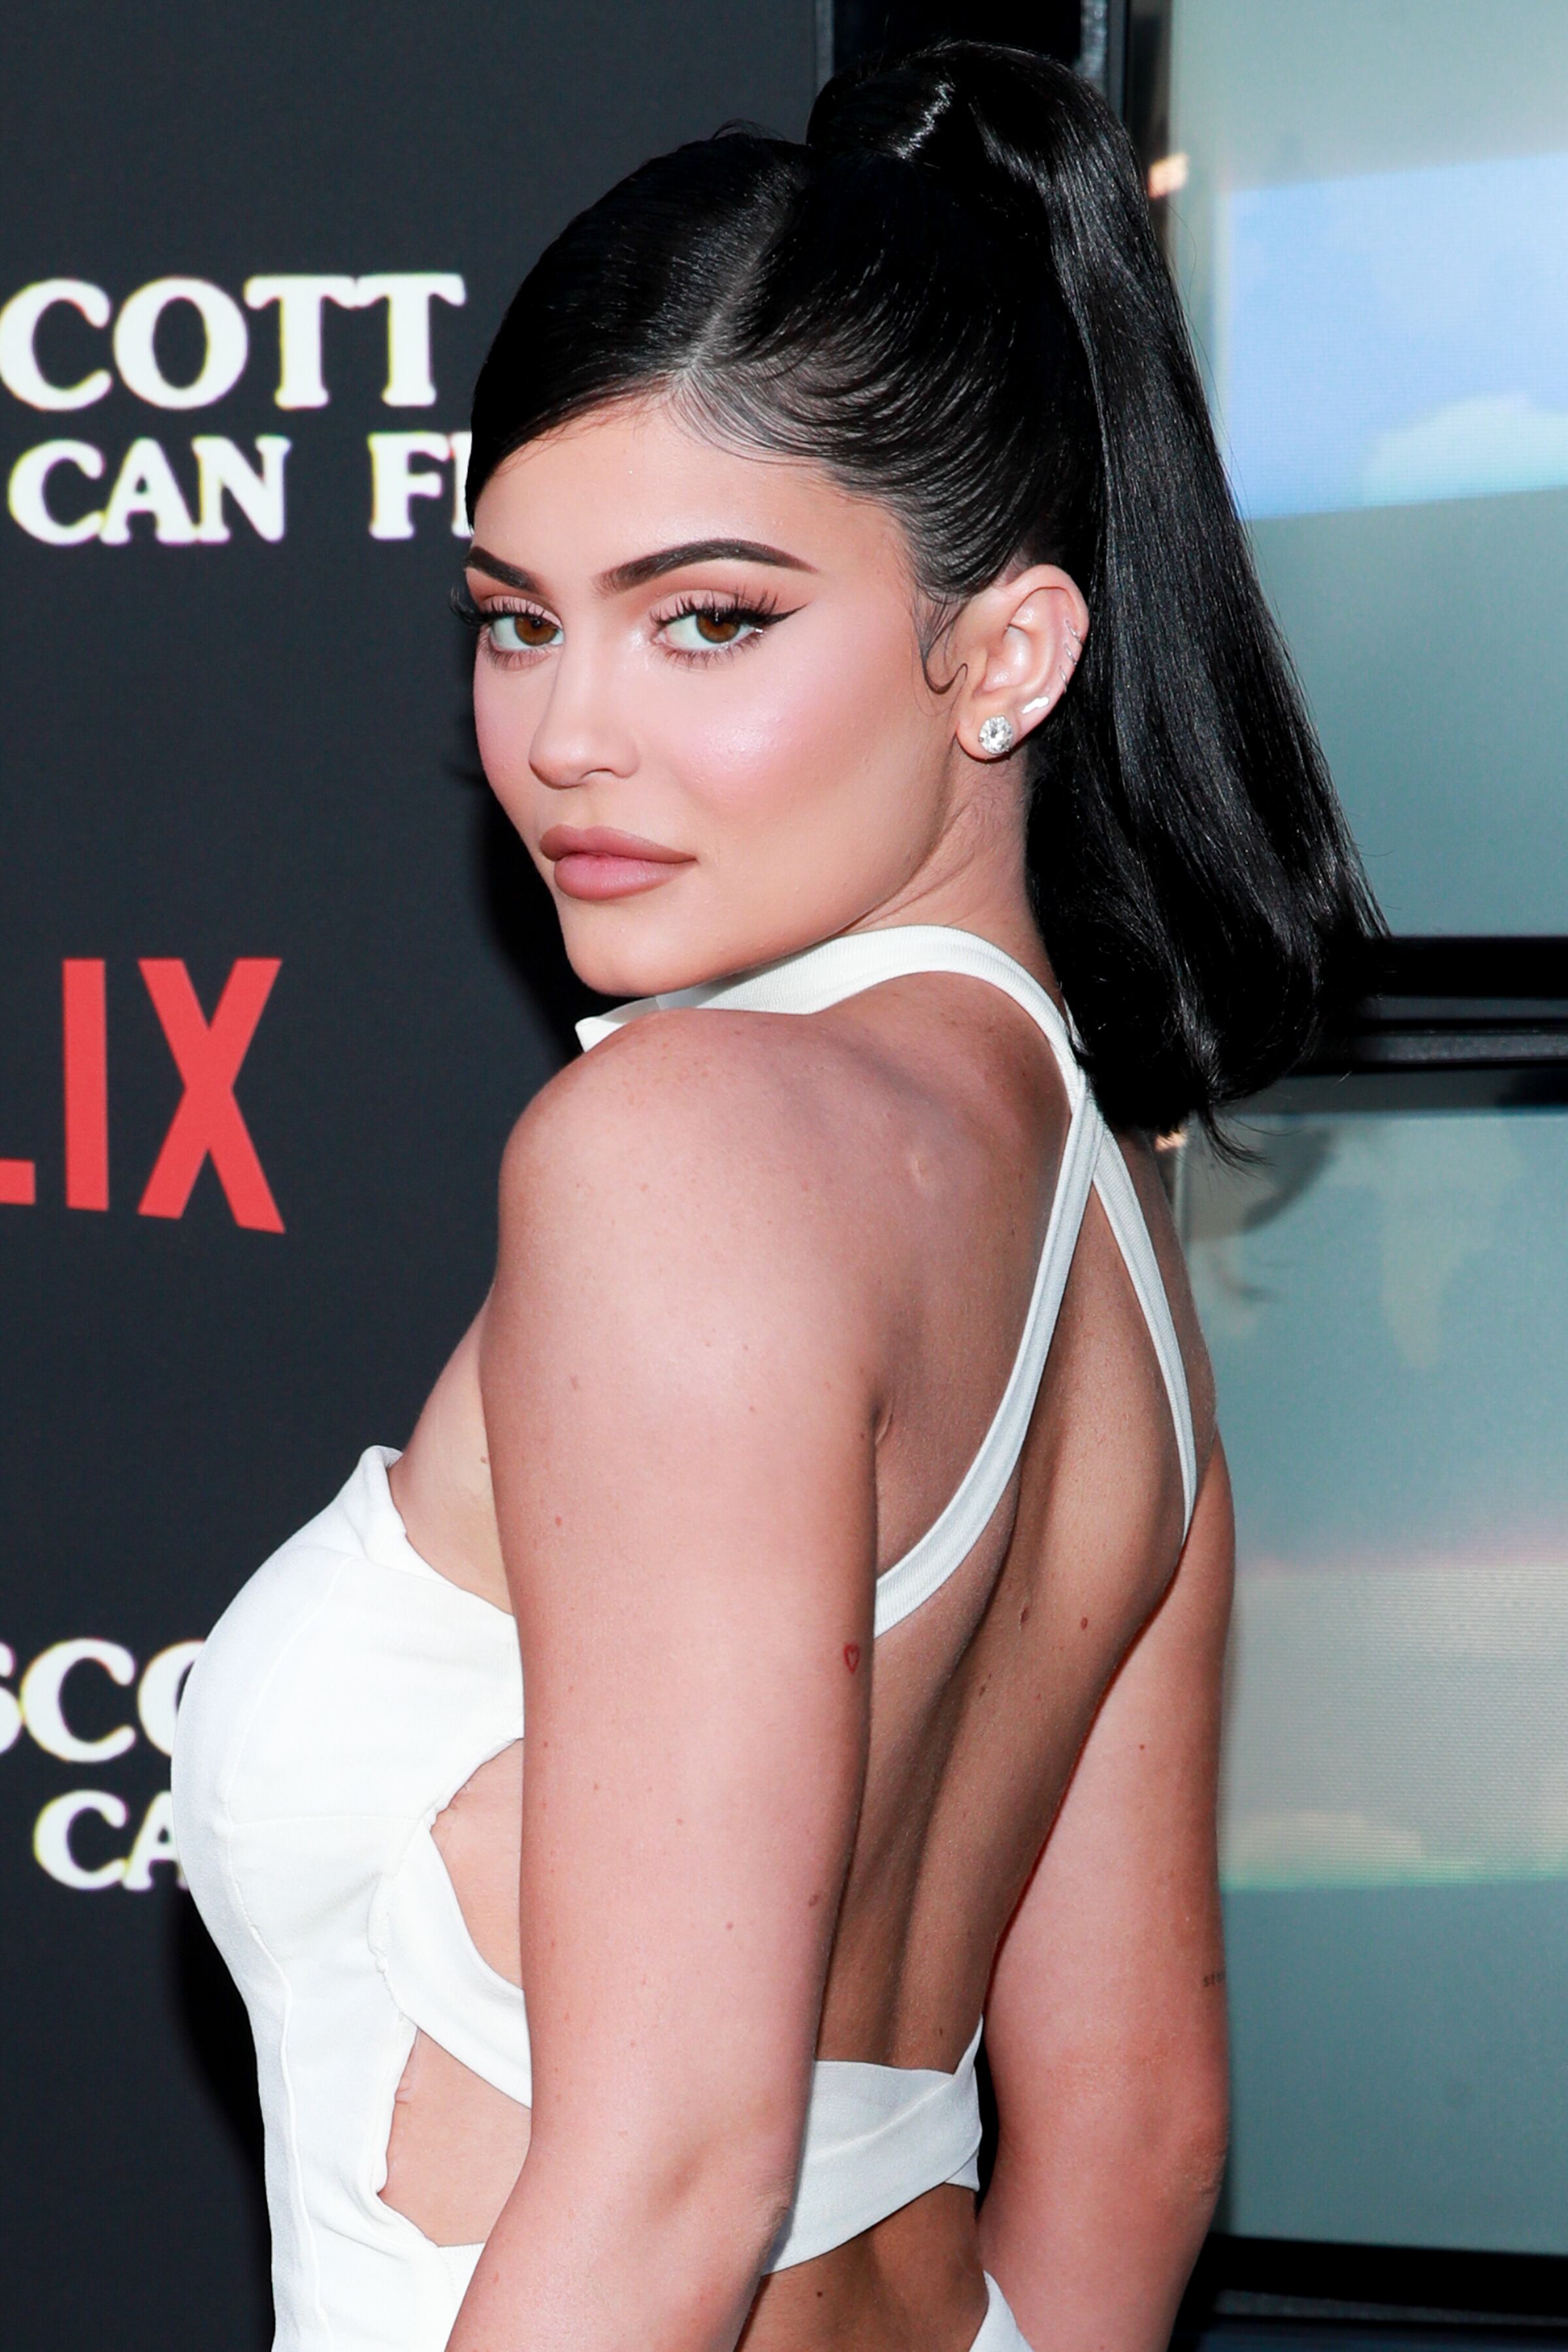 Kylie Jenner attends the premiere of Netflix's "Travis Scott: Look Mom I Can Fly" at Barker Hangar on August 27, 2019 in Santa Monica, California. | Photo: Getty Images